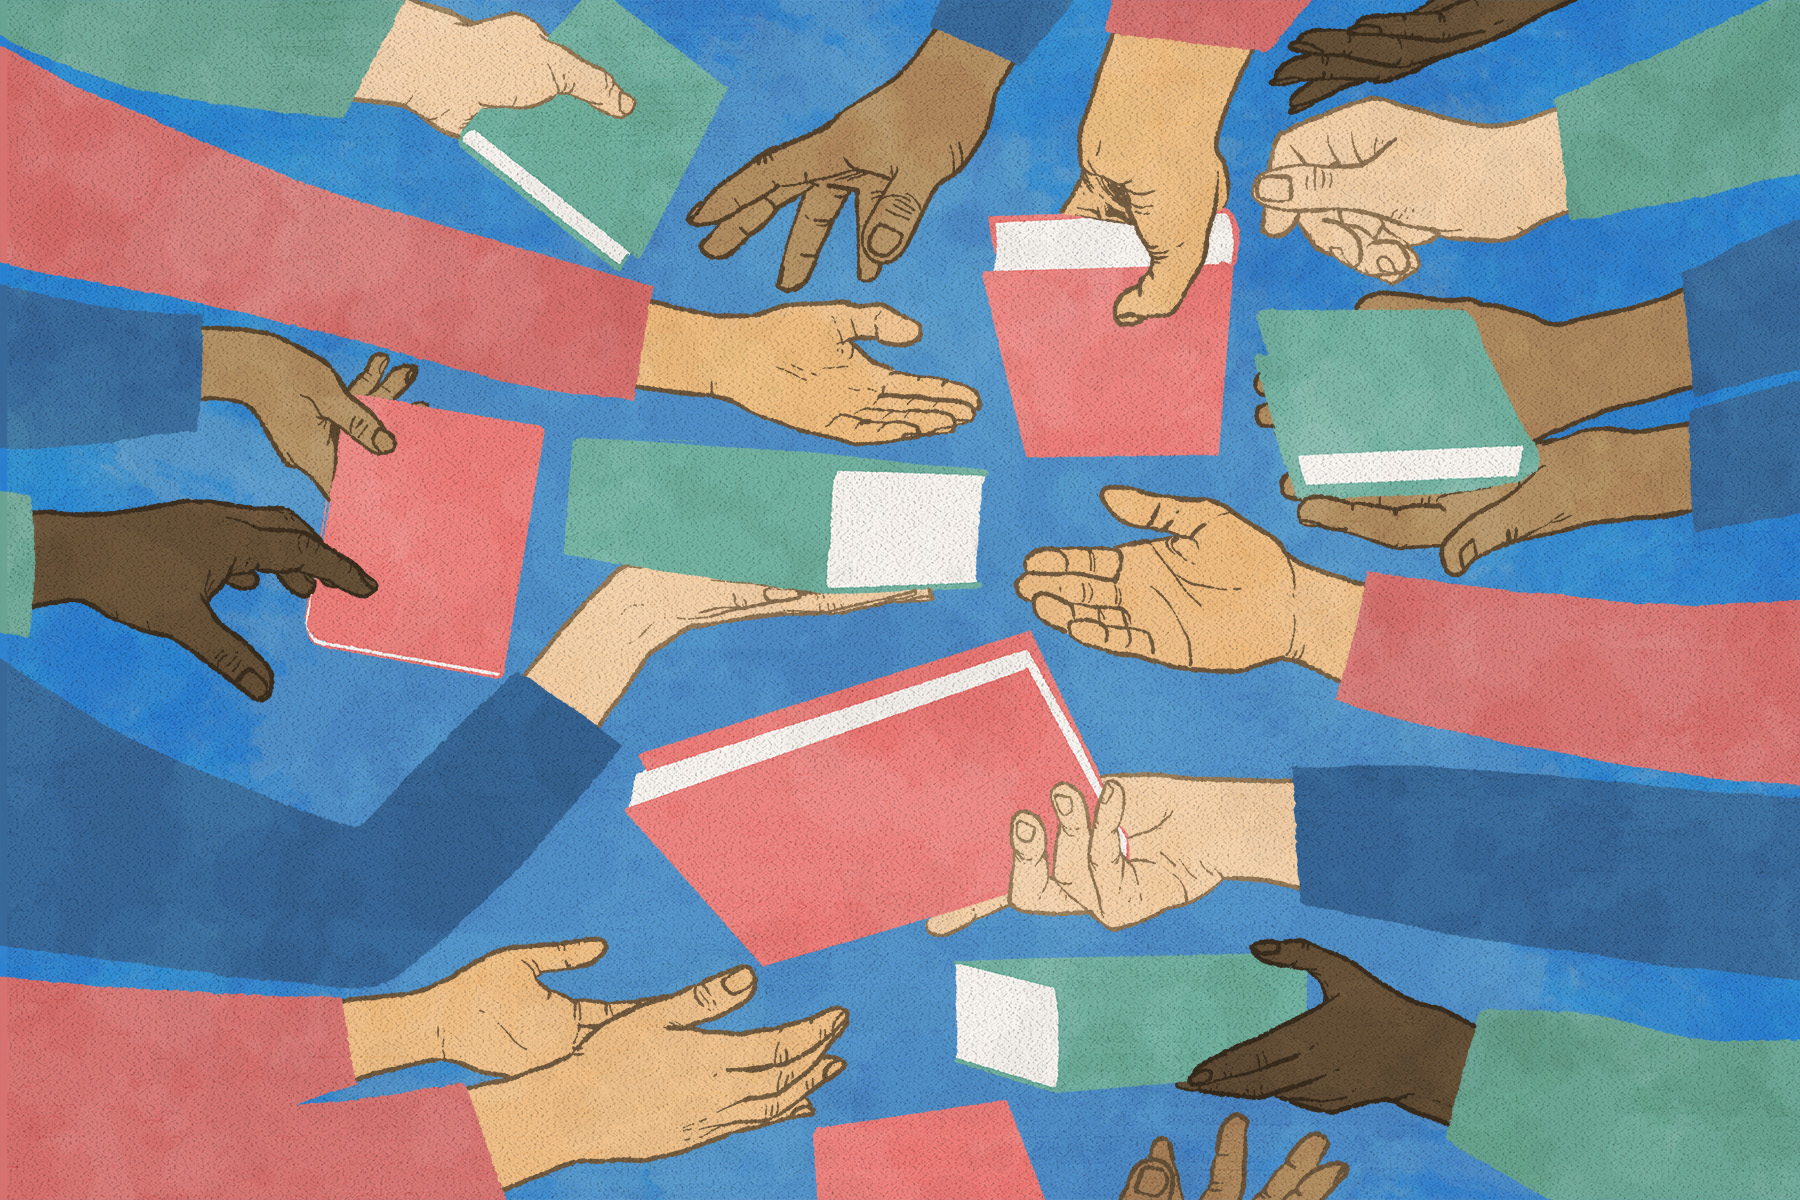 An illustration of different hands stretching out towards a book against a blue background